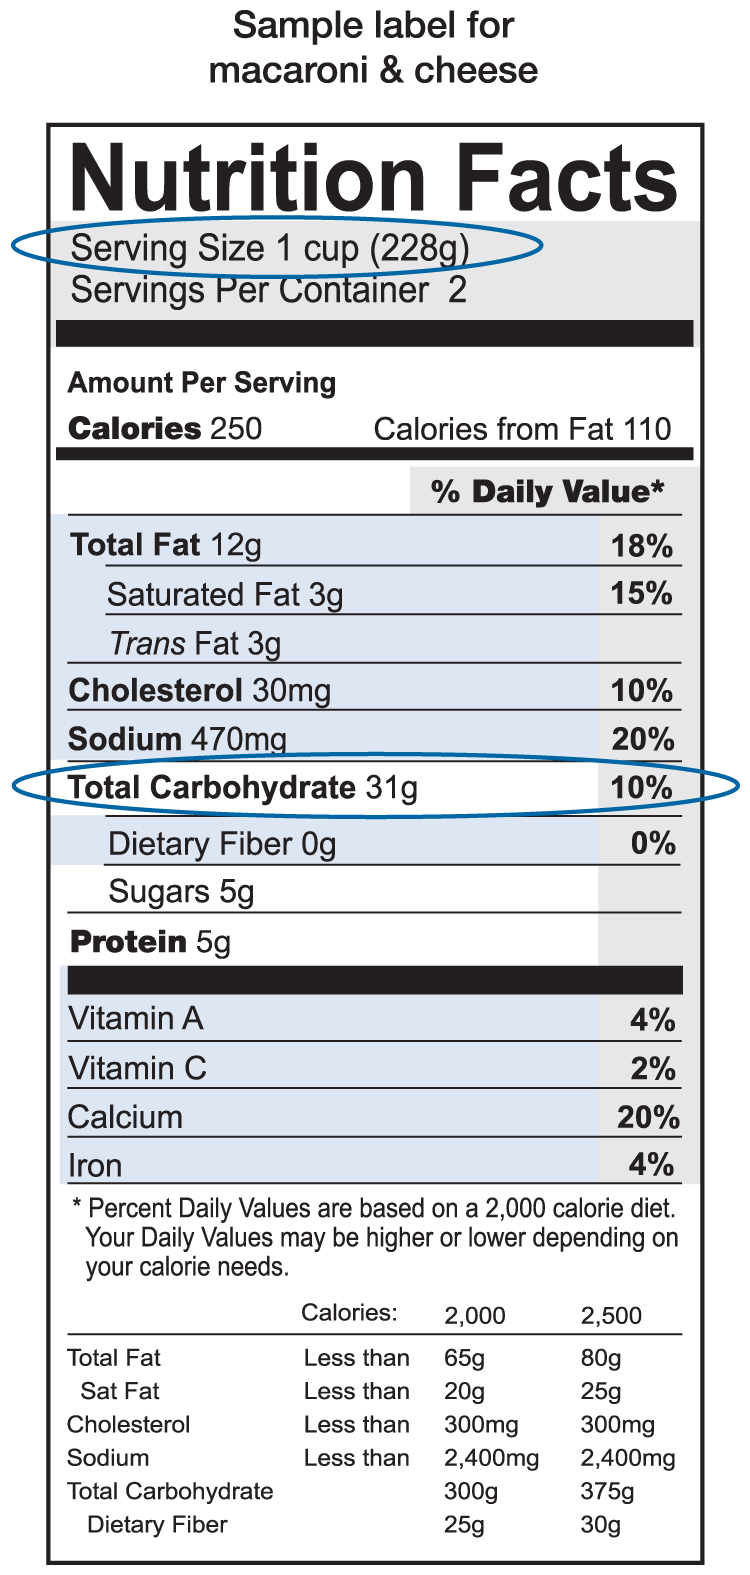 Sample Nutrition Label For Macaroni And